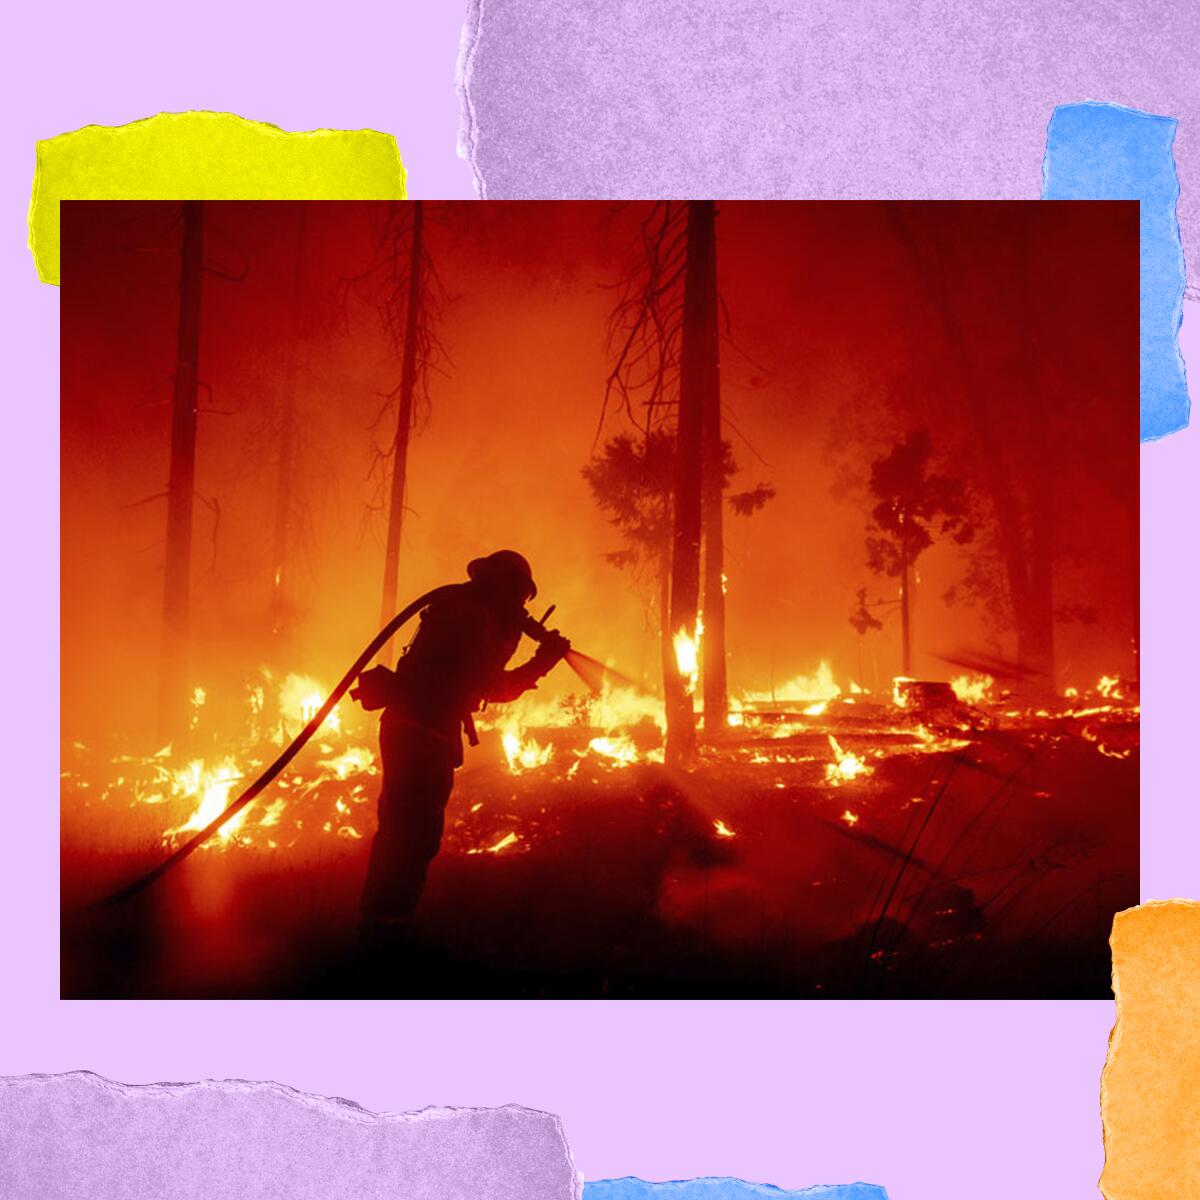 A firefighter in silhouette with burning ground and orange haze at night.